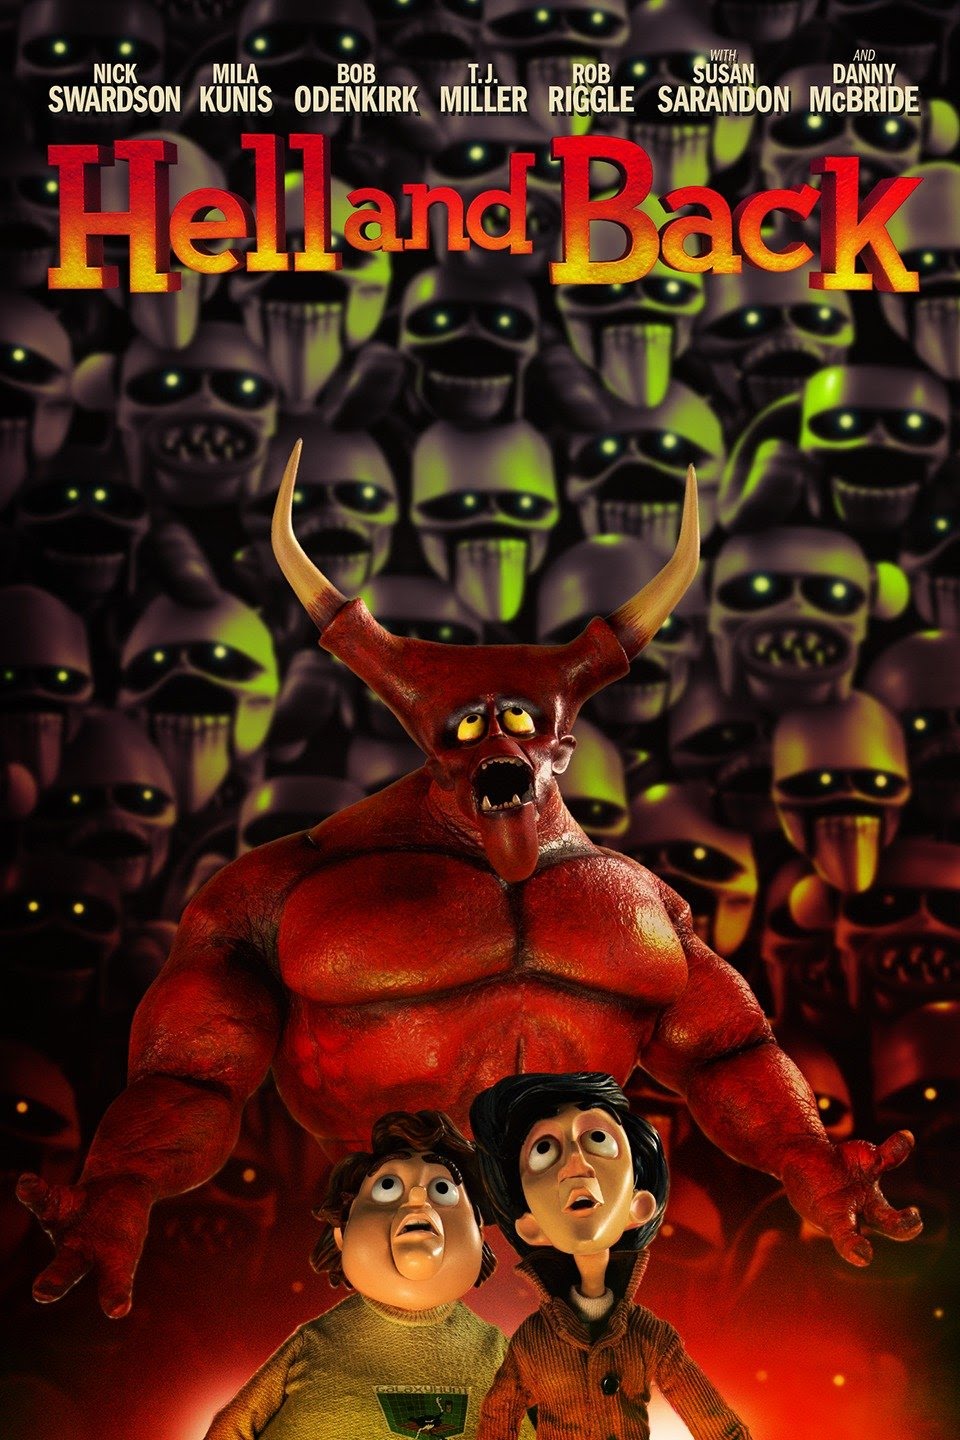 Hell and Back [HD] (2015)